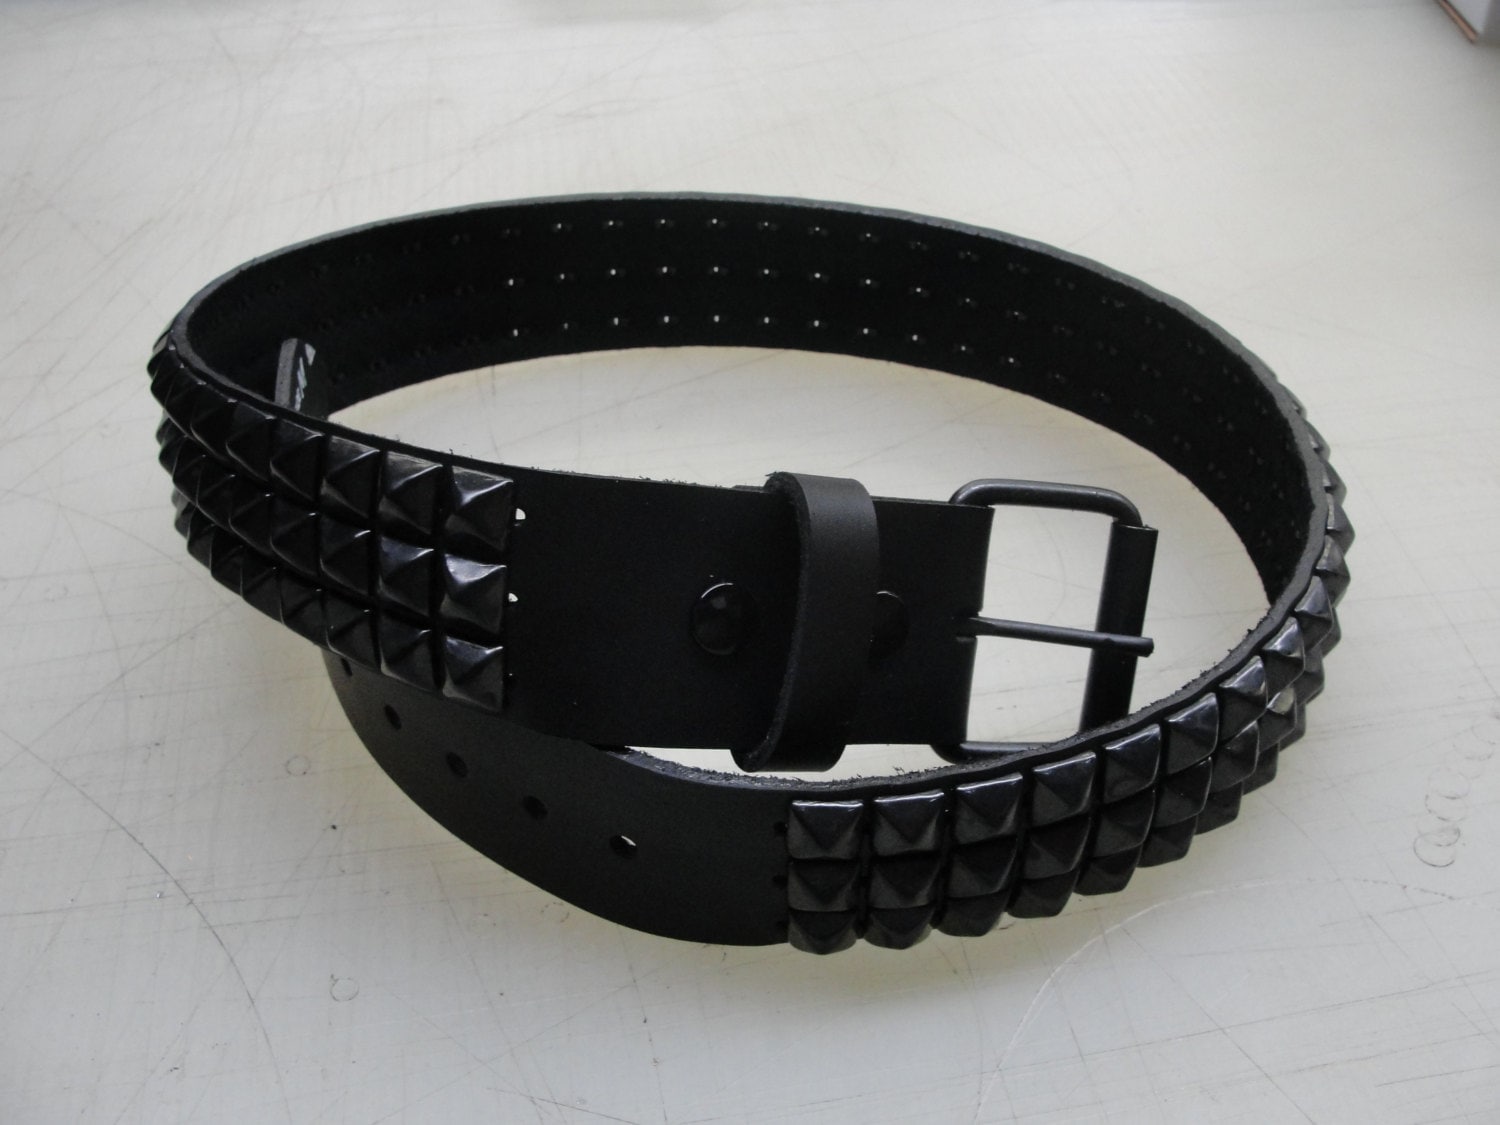 New Cheap Handmade In England Real Leather Black Pyramid Studded White Belt 